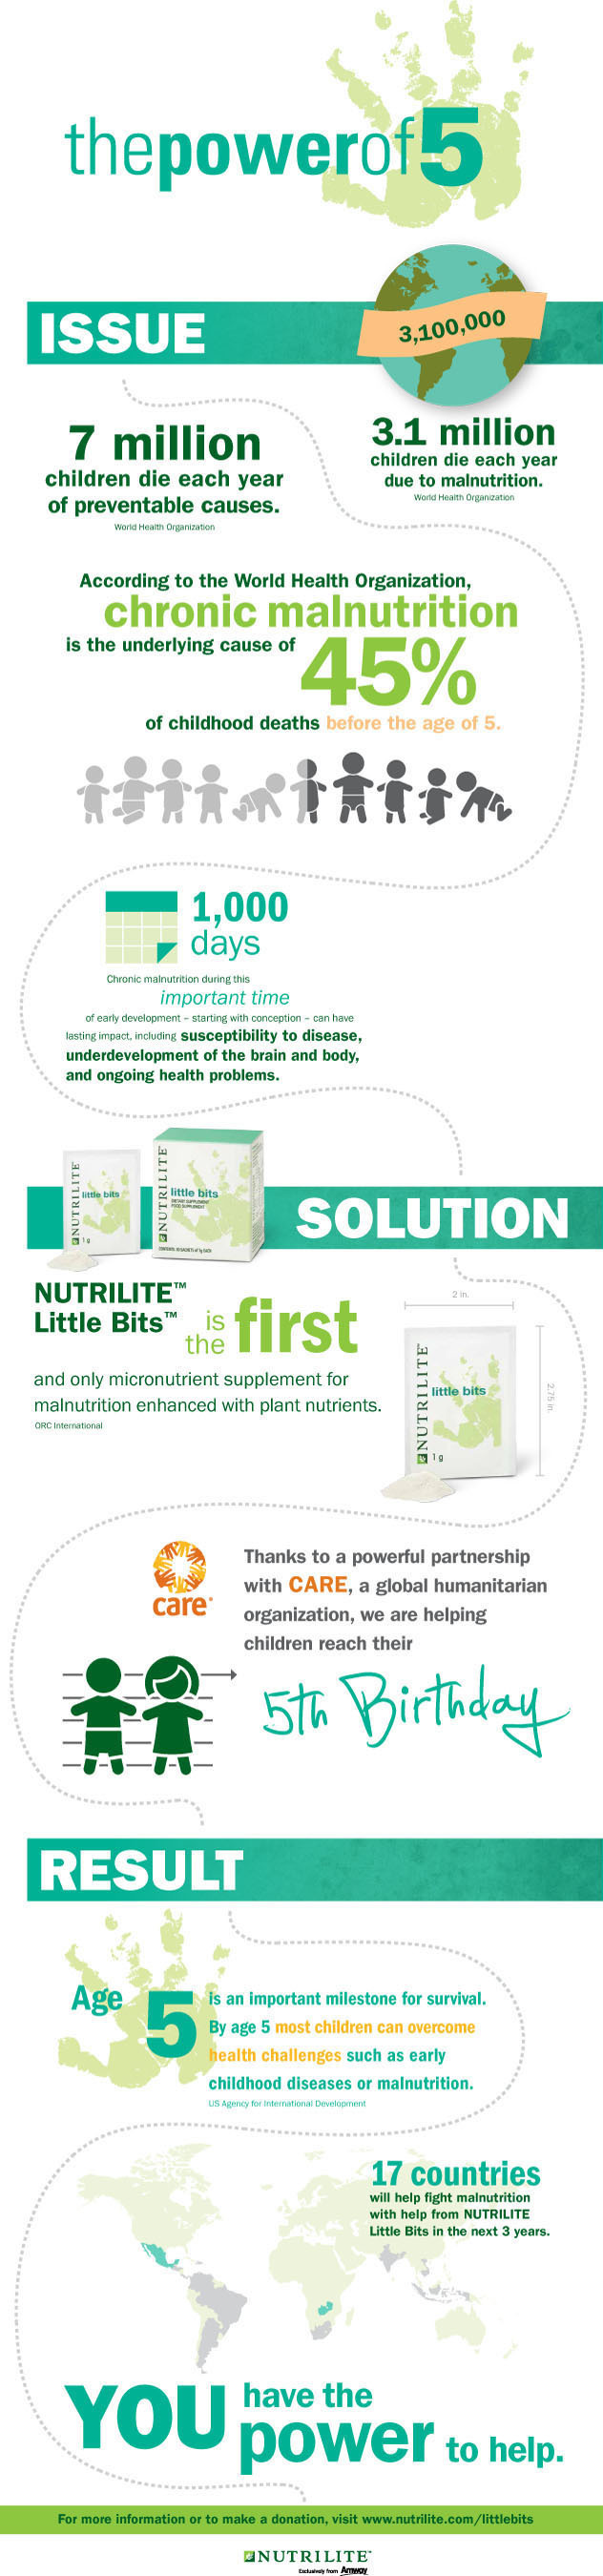 NUTRILITE Little Bits Power of 5 Campaign Infographic (PRNewsFoto/Amway)